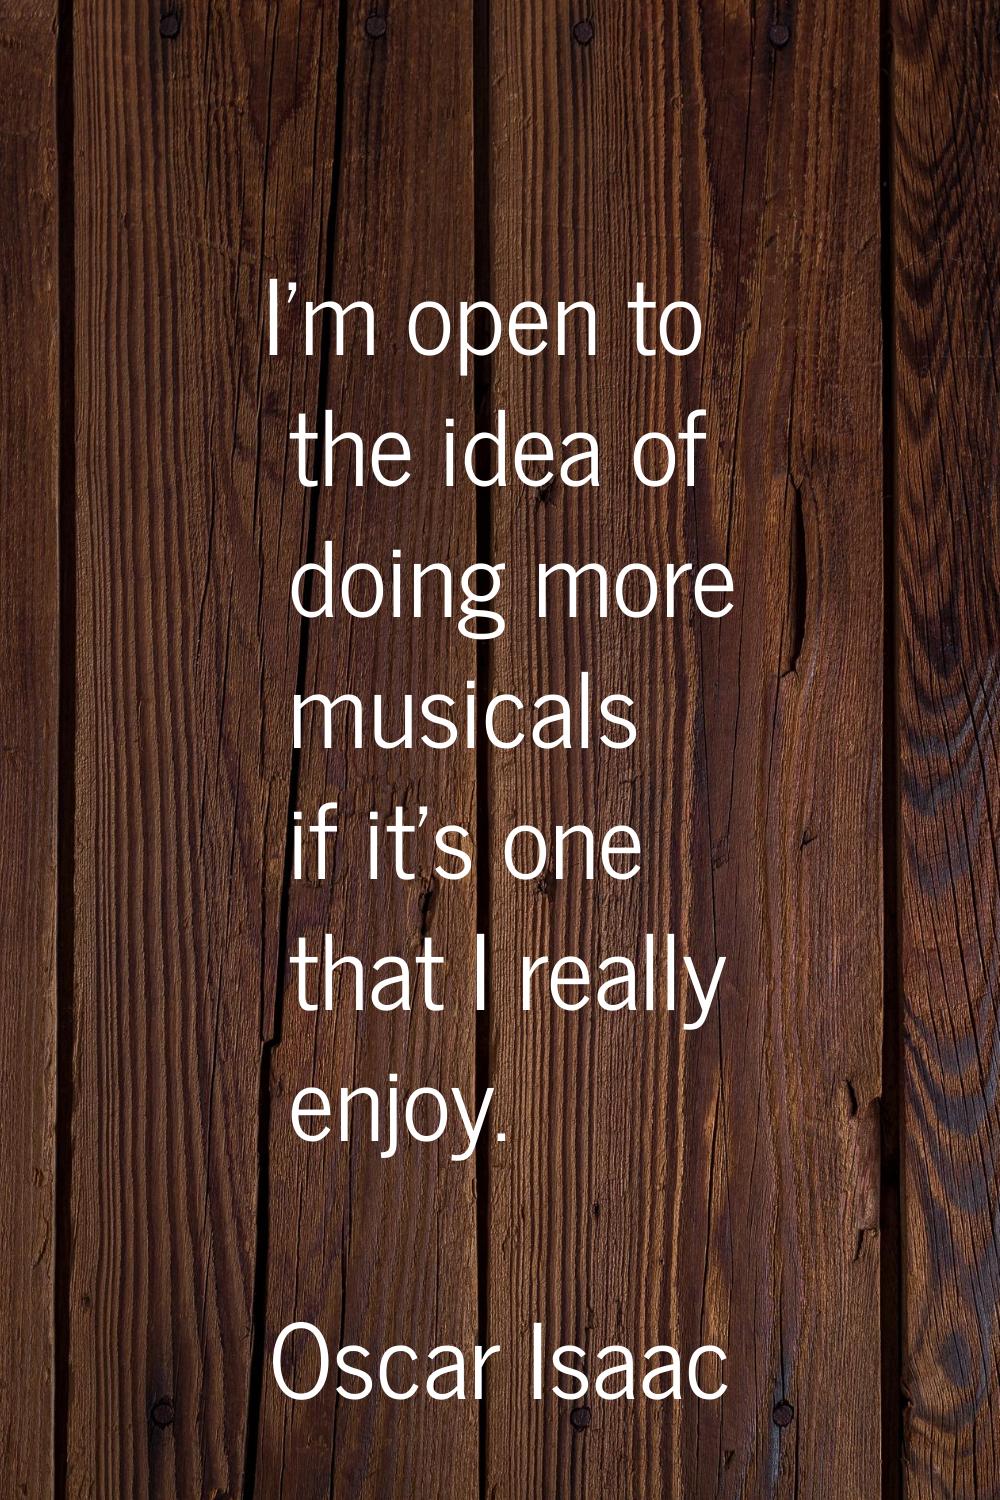 I'm open to the idea of doing more musicals if it's one that I really enjoy.